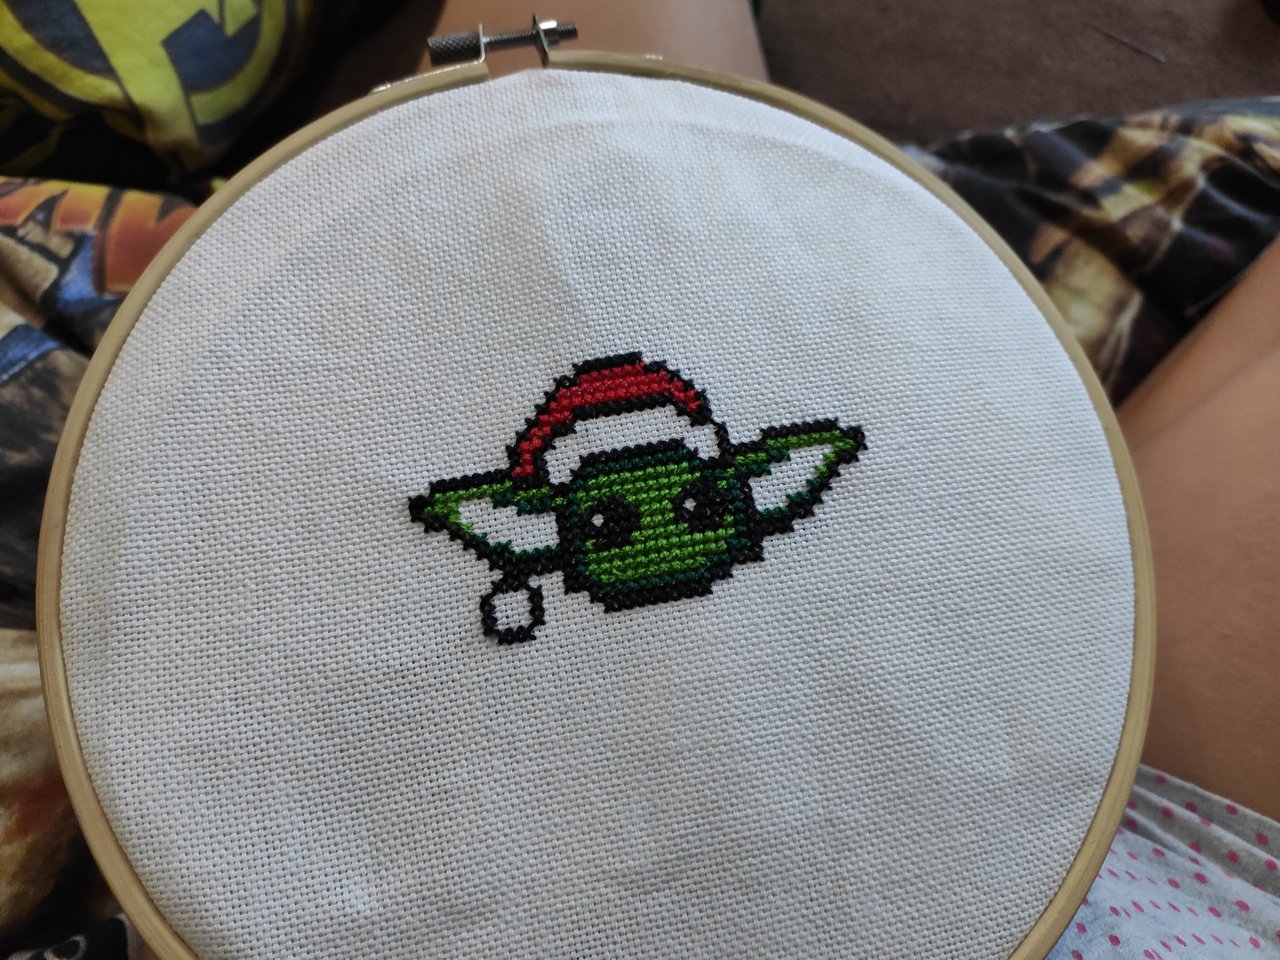 Cross-stitching is just a simple math. But boy, am I bad at math